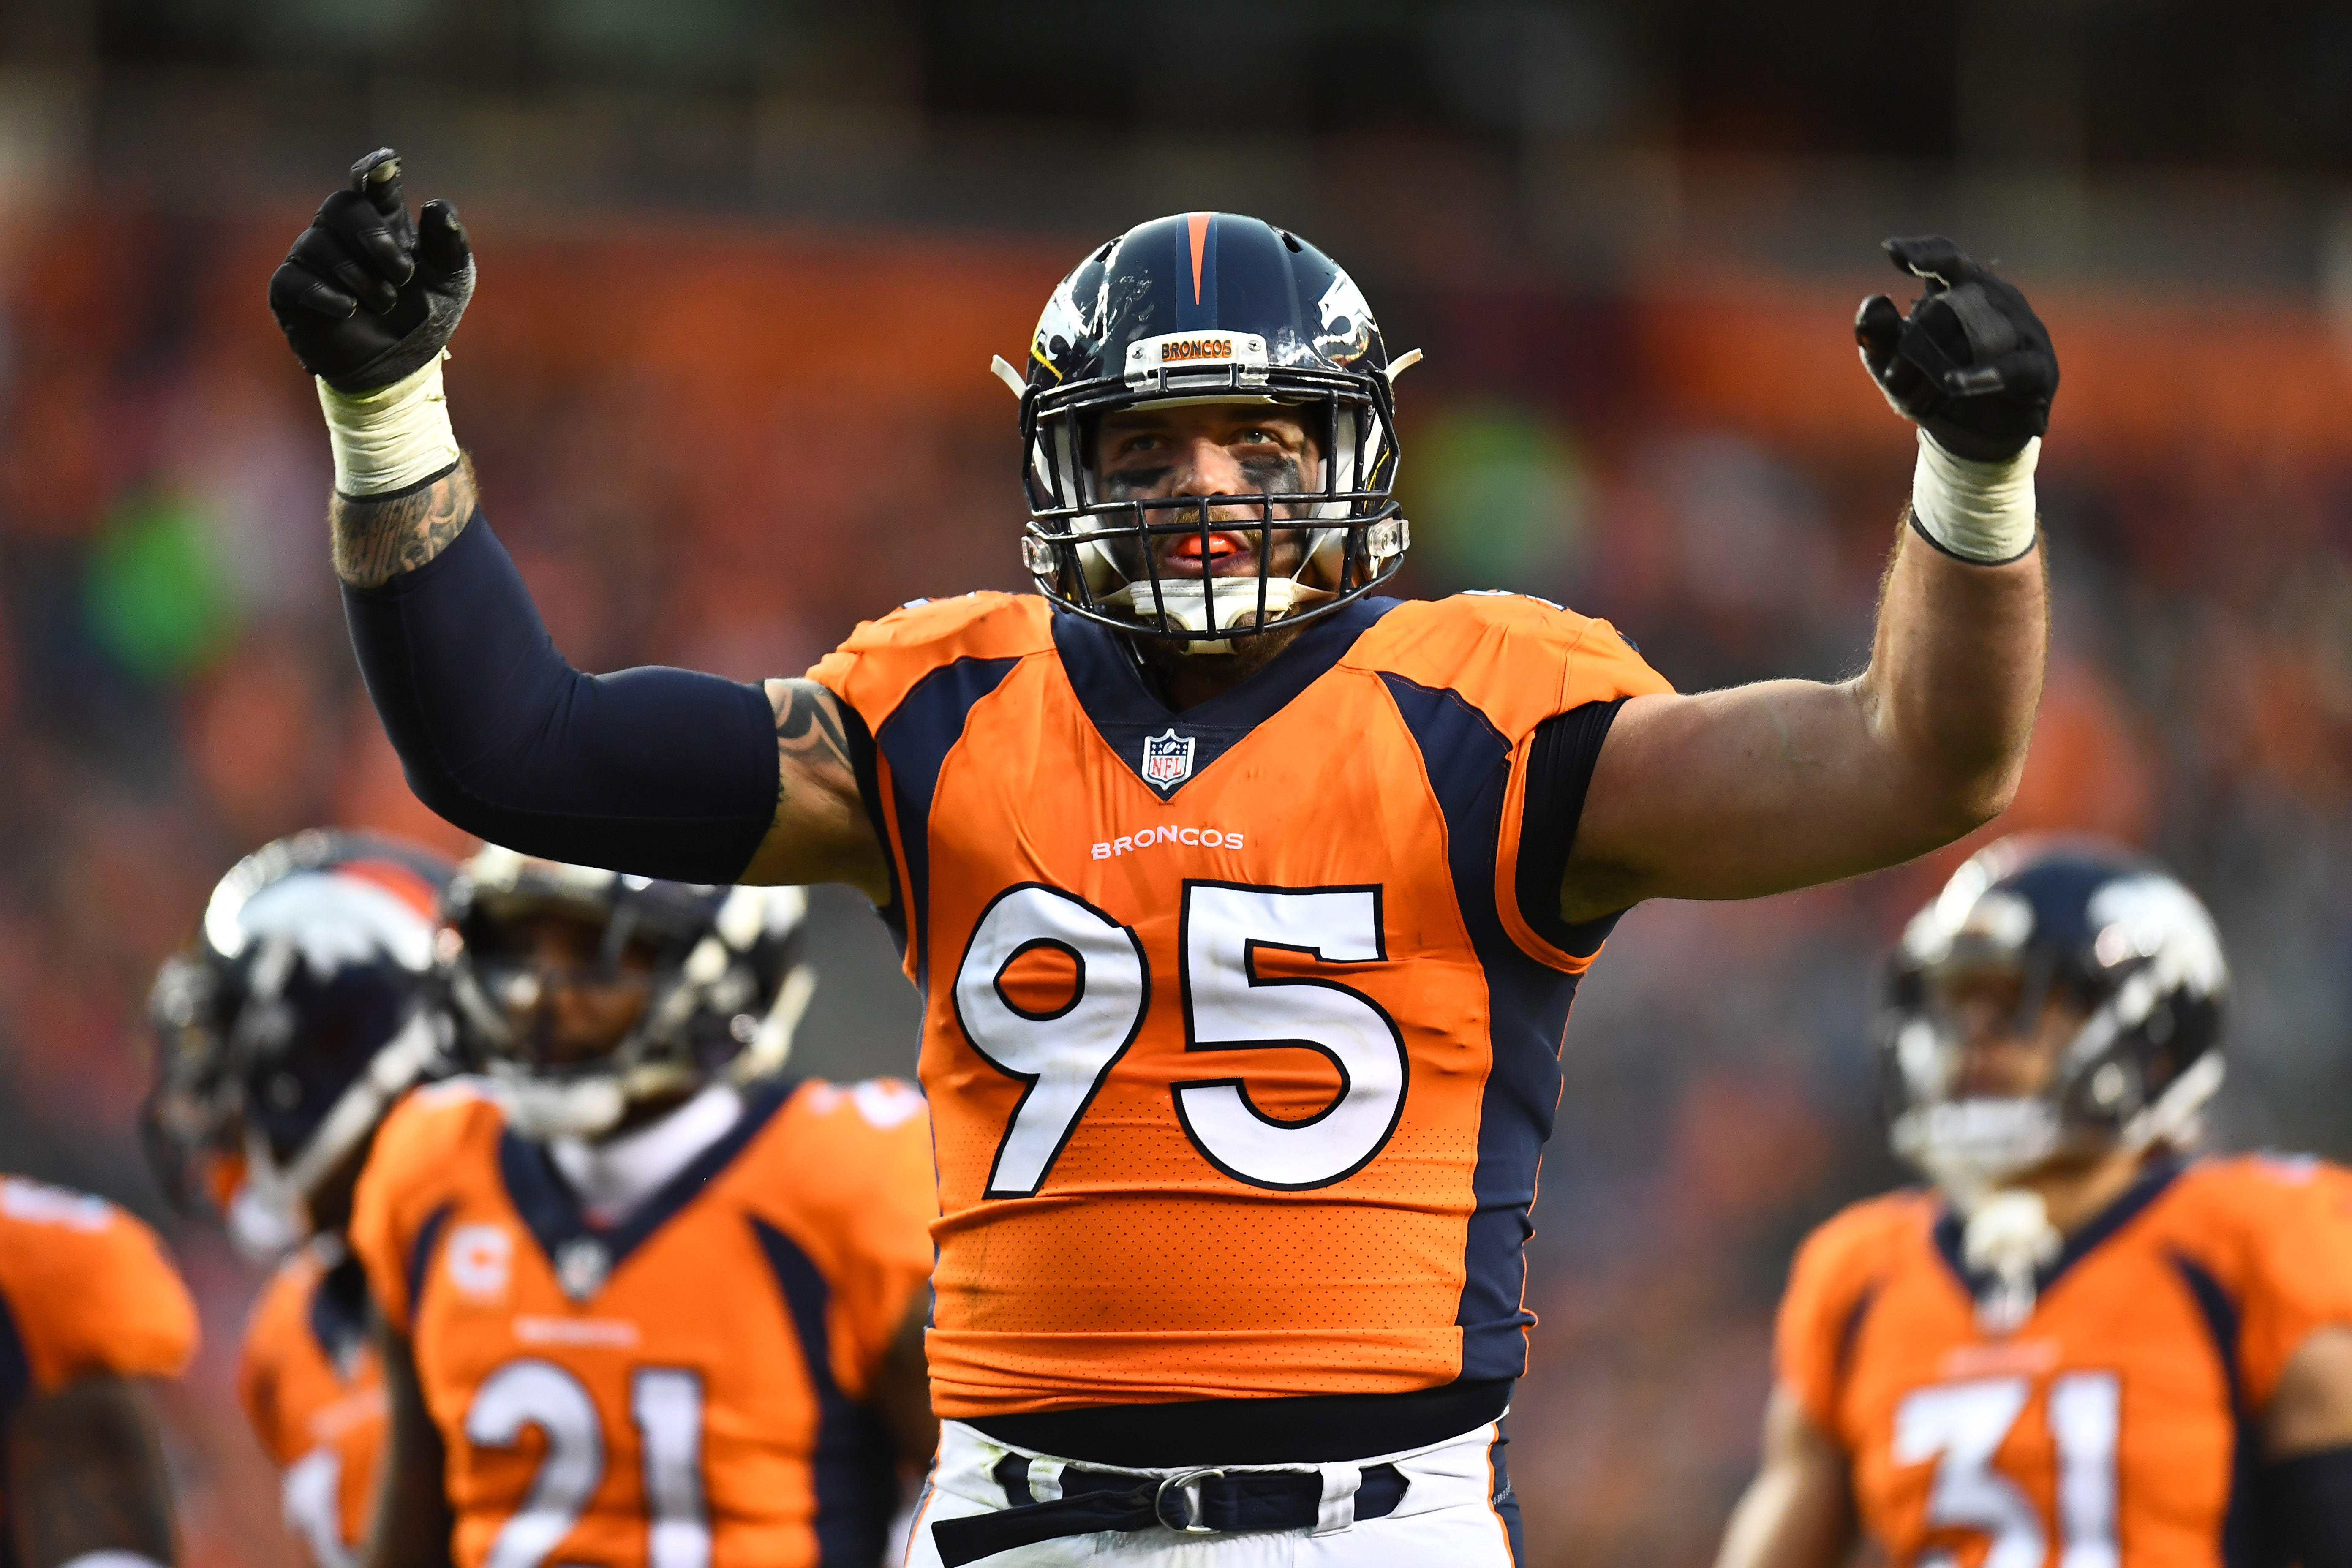 Denver Broncos defensive end Derek Wolfe (95) attempts to rally the crowd in the second half against the Cincinnati Bengals at Sports Authority Field at Mile High.